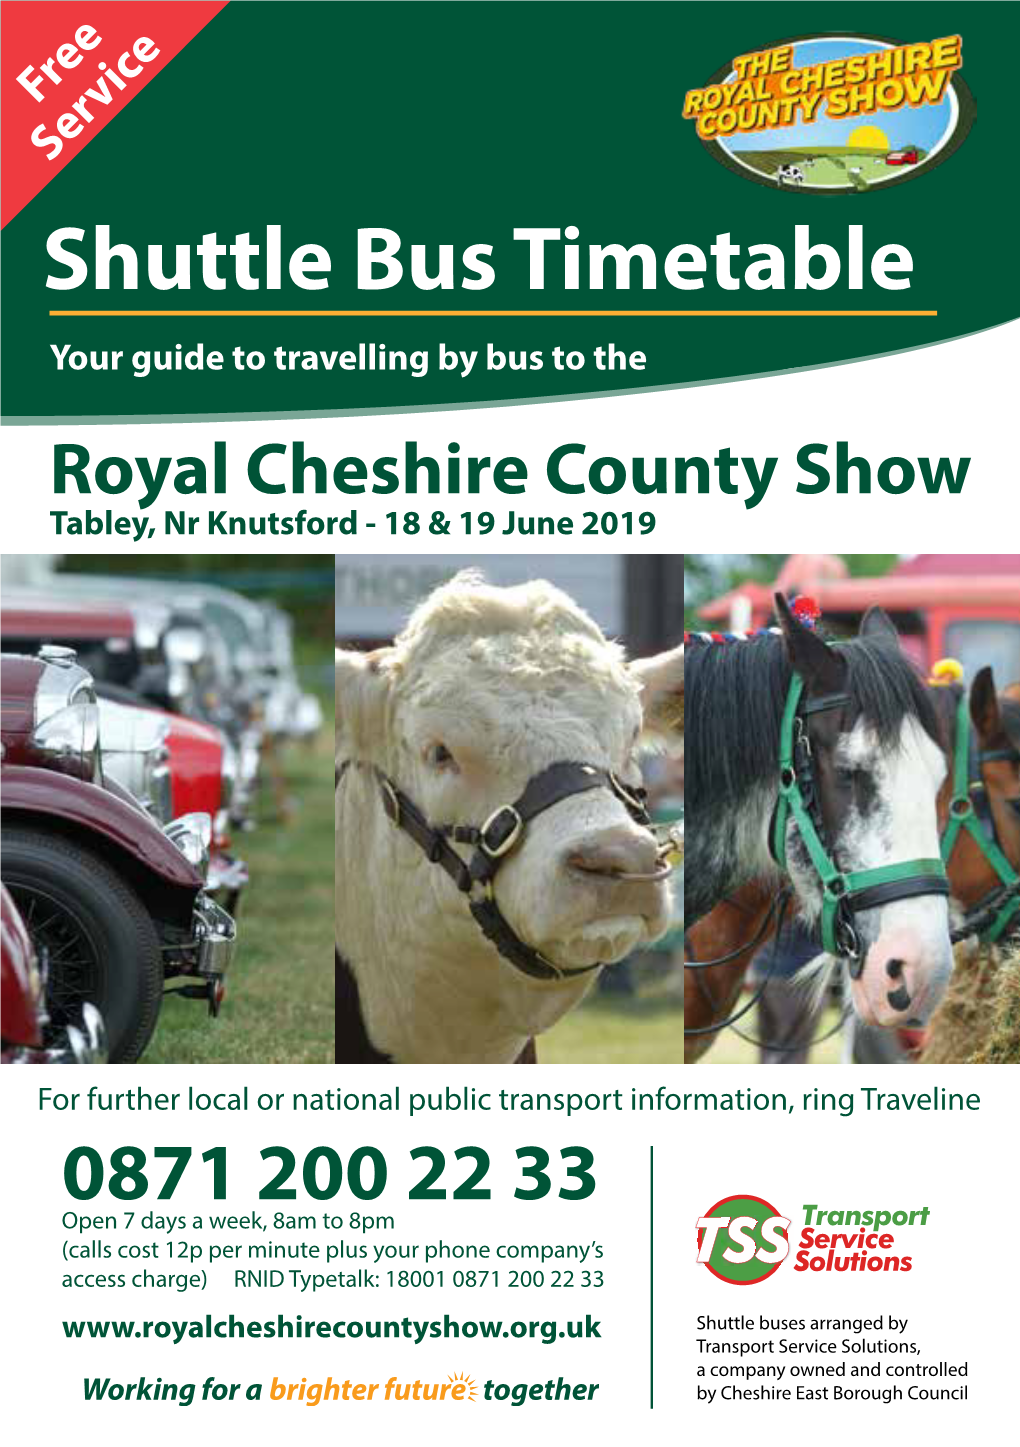 Shuttle Bus Timetableleaflet R66 Your Guide to Travelling by Bus to the Royal Cheshire County Show Tabley, Nr Knutsford - 18 & 19 June 2019